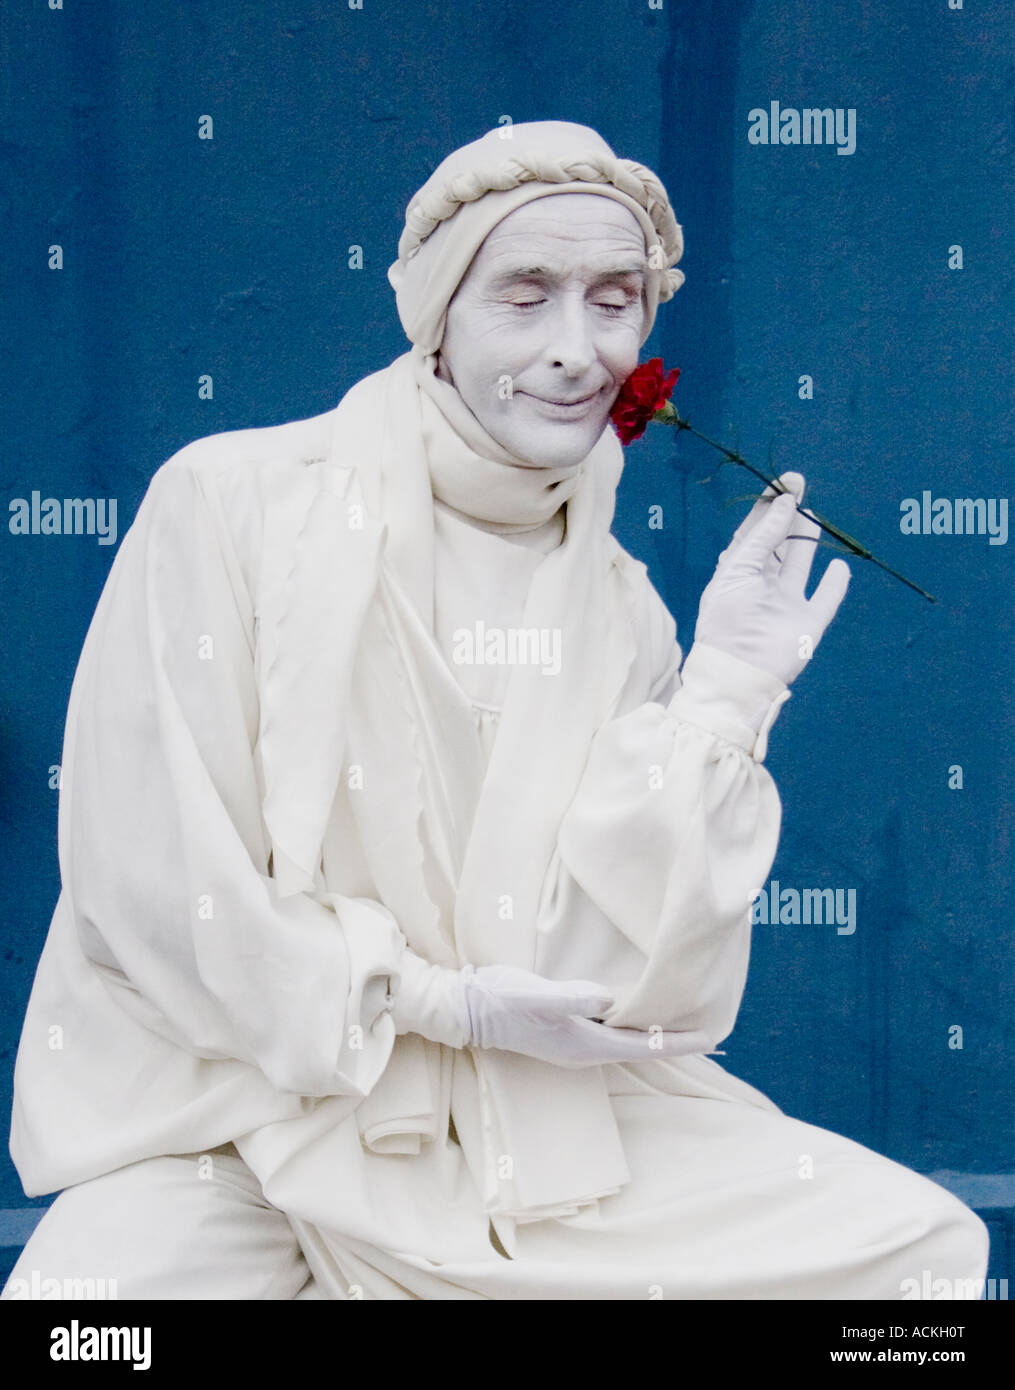 Mime artist wearing white robes, and with white face smelling a red rose Stock Photo